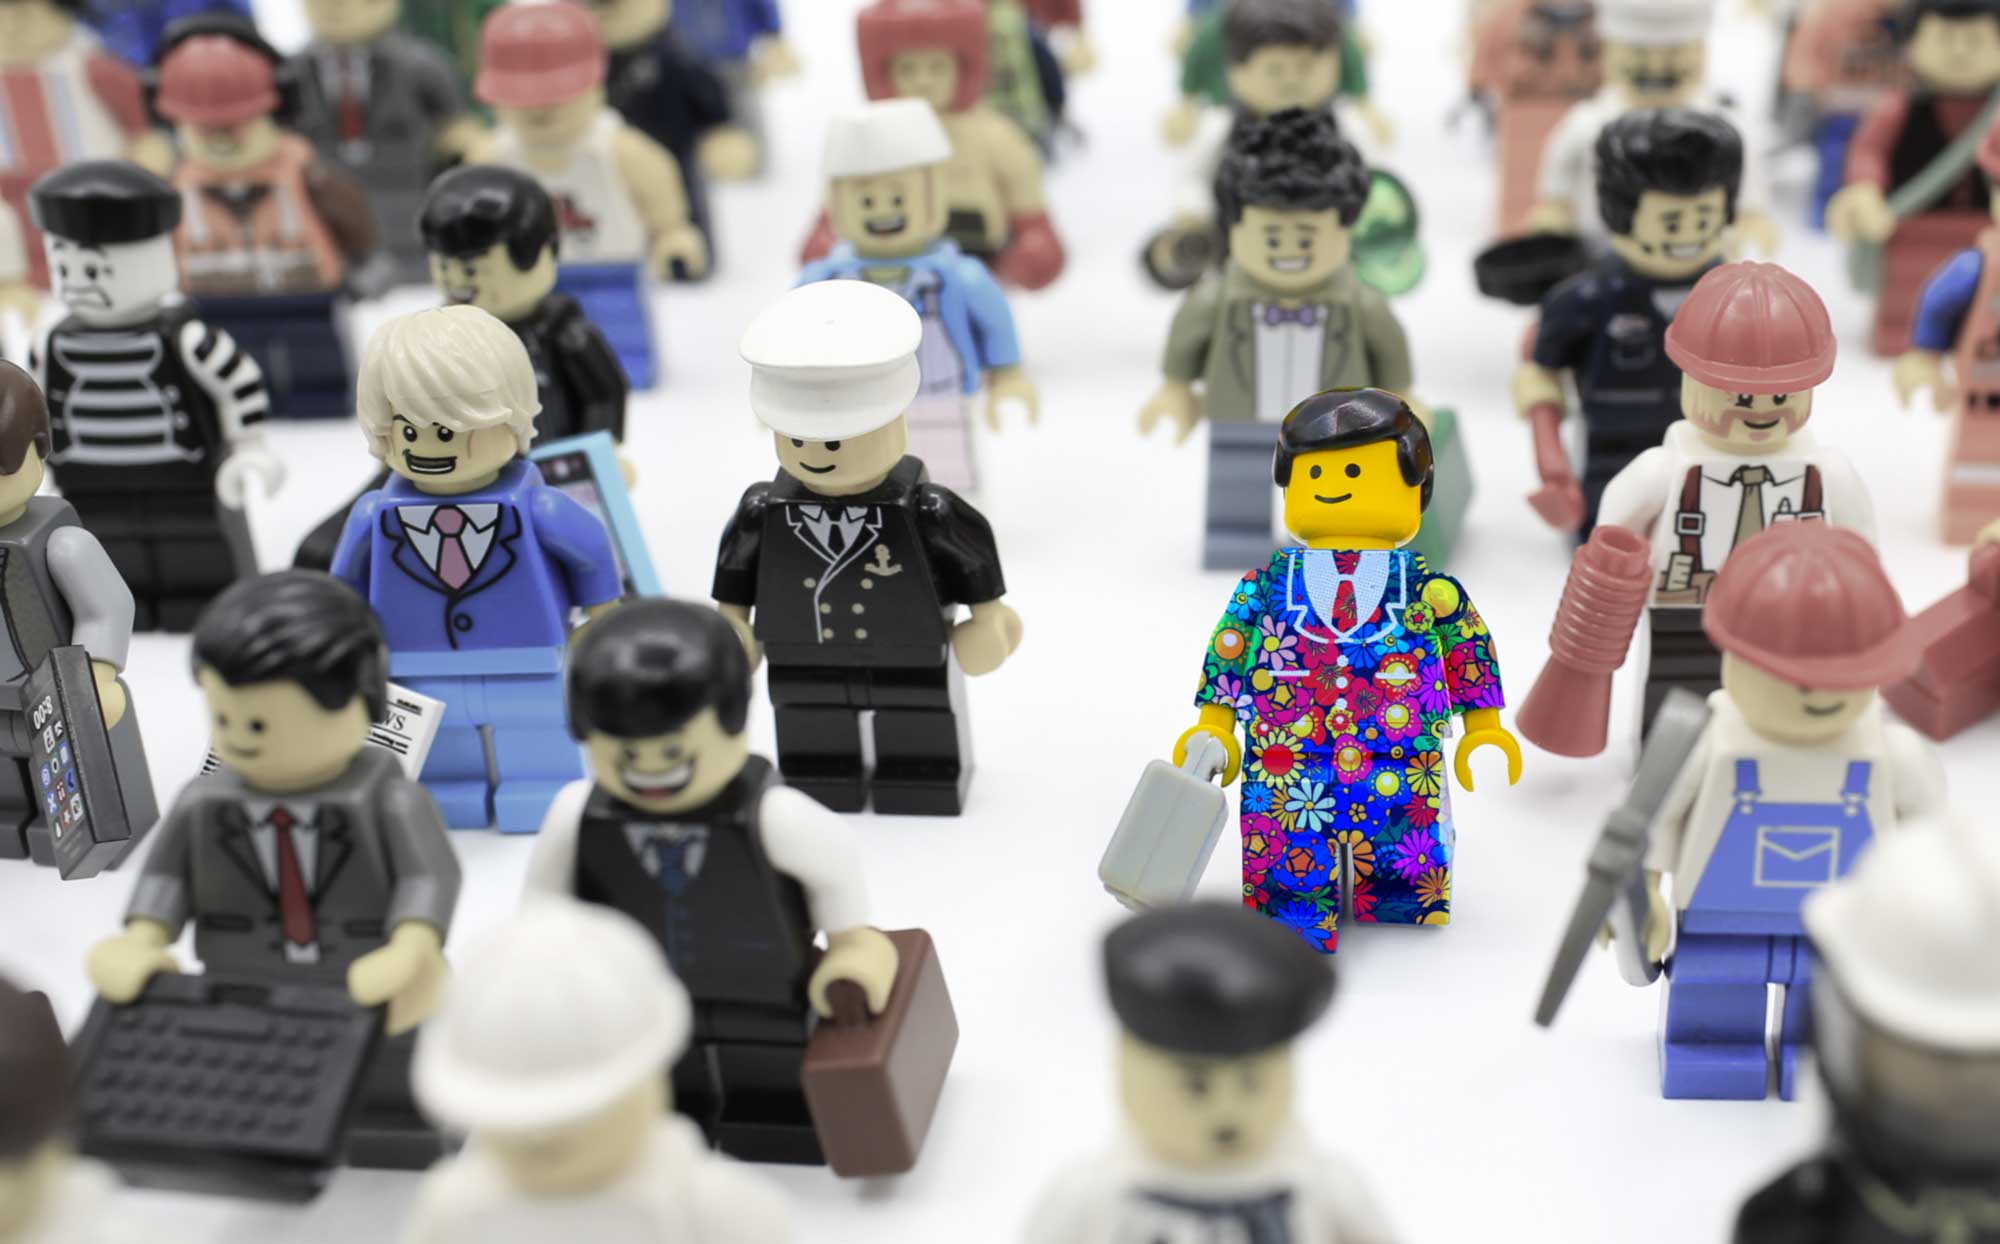 A brightly coloured lego man in a floral suit, standing amongst a crowd of drab lego figures